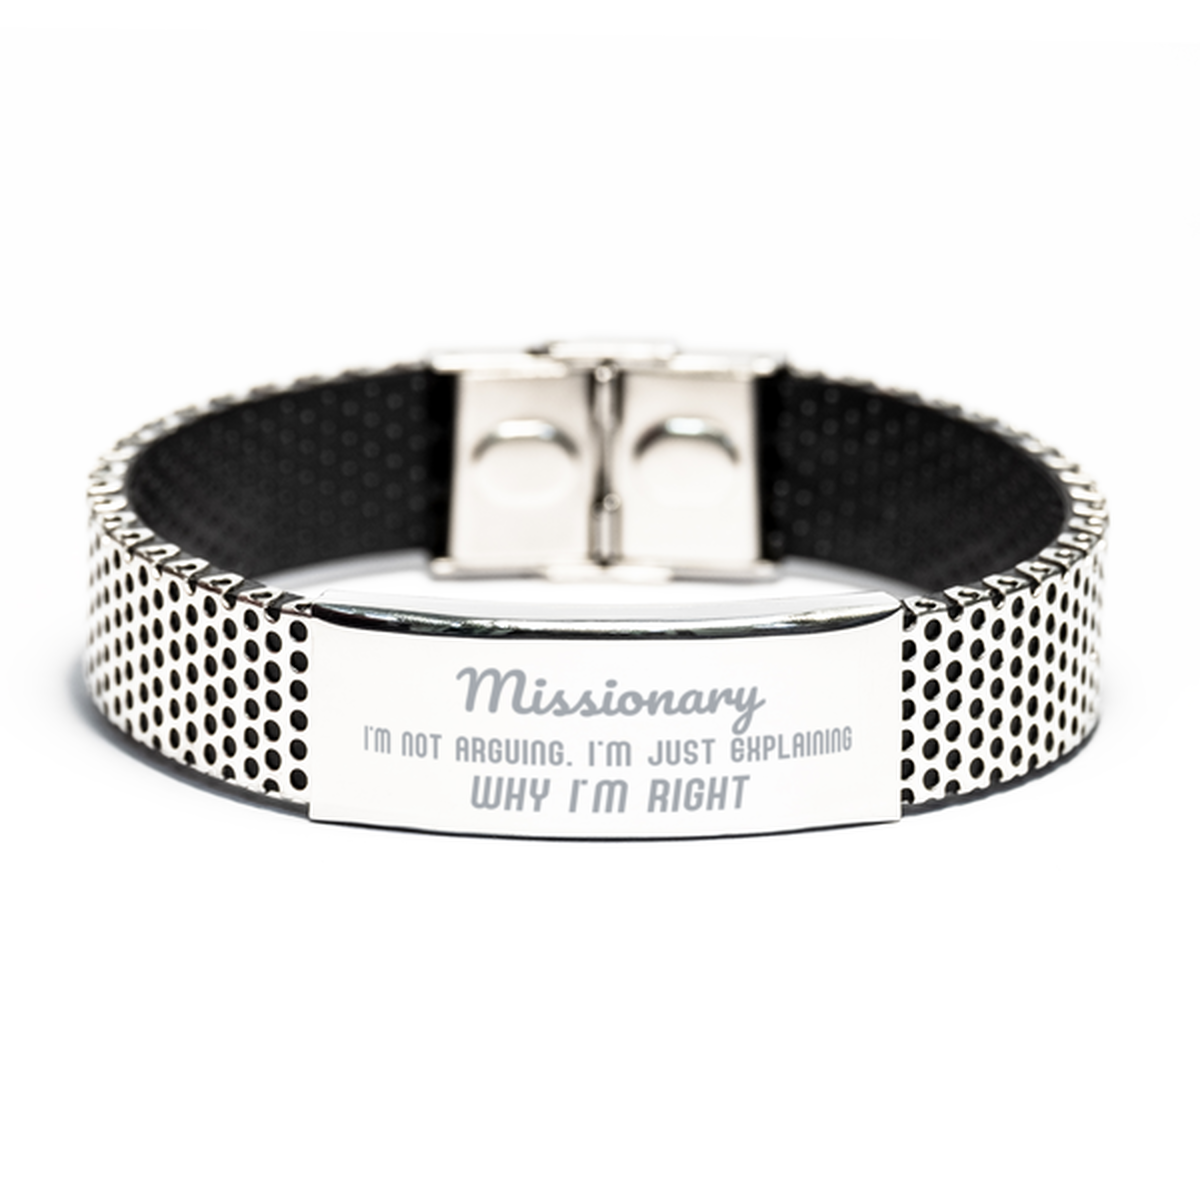 Missionary I'm not Arguing. I'm Just Explaining Why I'm RIGHT Stainless Steel Bracelet, Funny Saying Quote Missionary Gifts For Missionary Graduation Birthday Christmas Gifts for Men Women Coworker